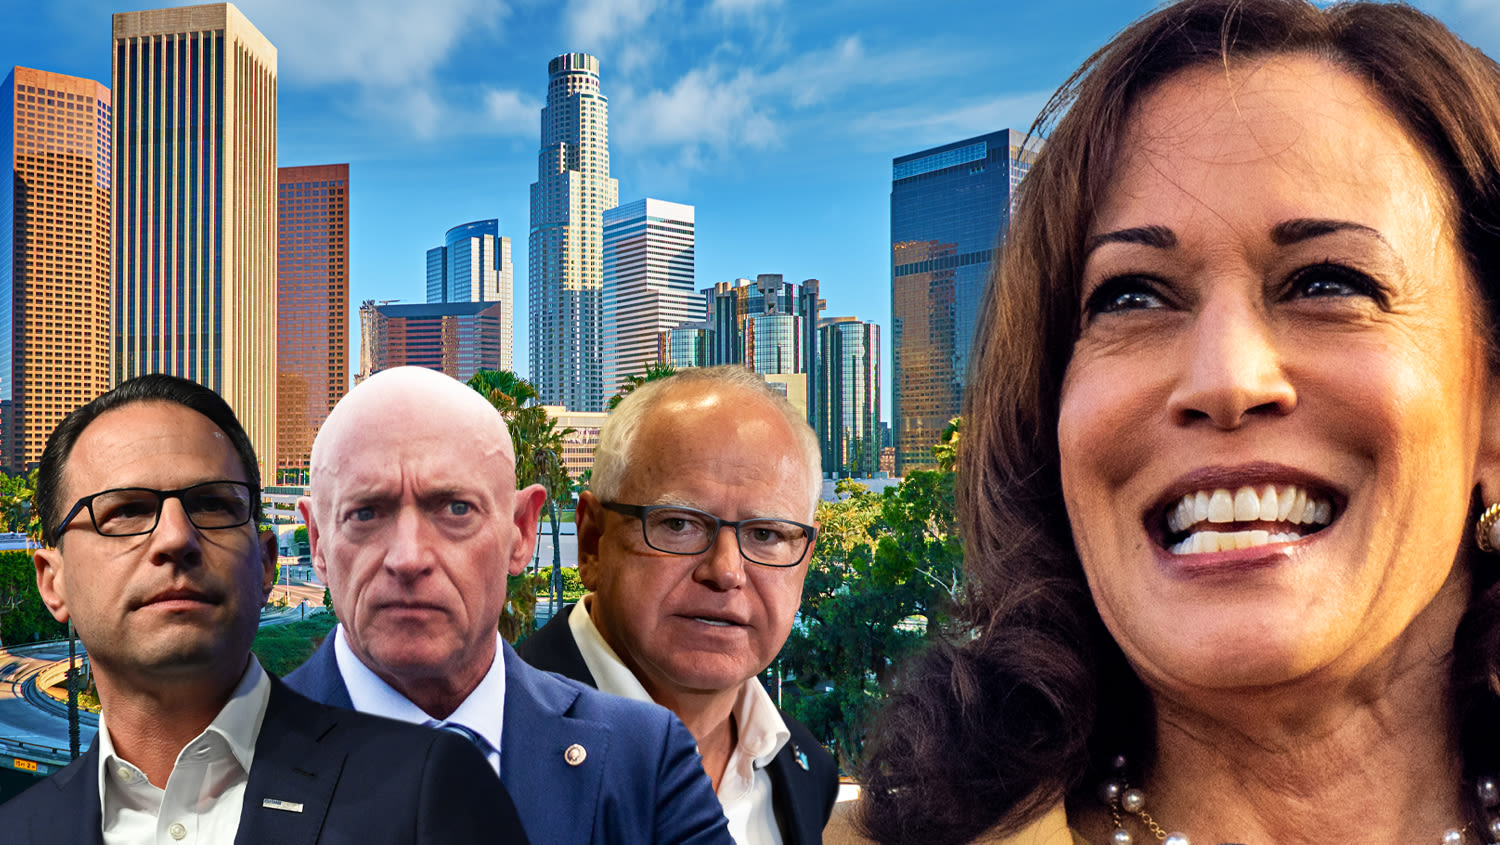 Hollywood Loves Drama Of Kamala Harris’ Veepstakes Decision, But Has A Clear Favorite